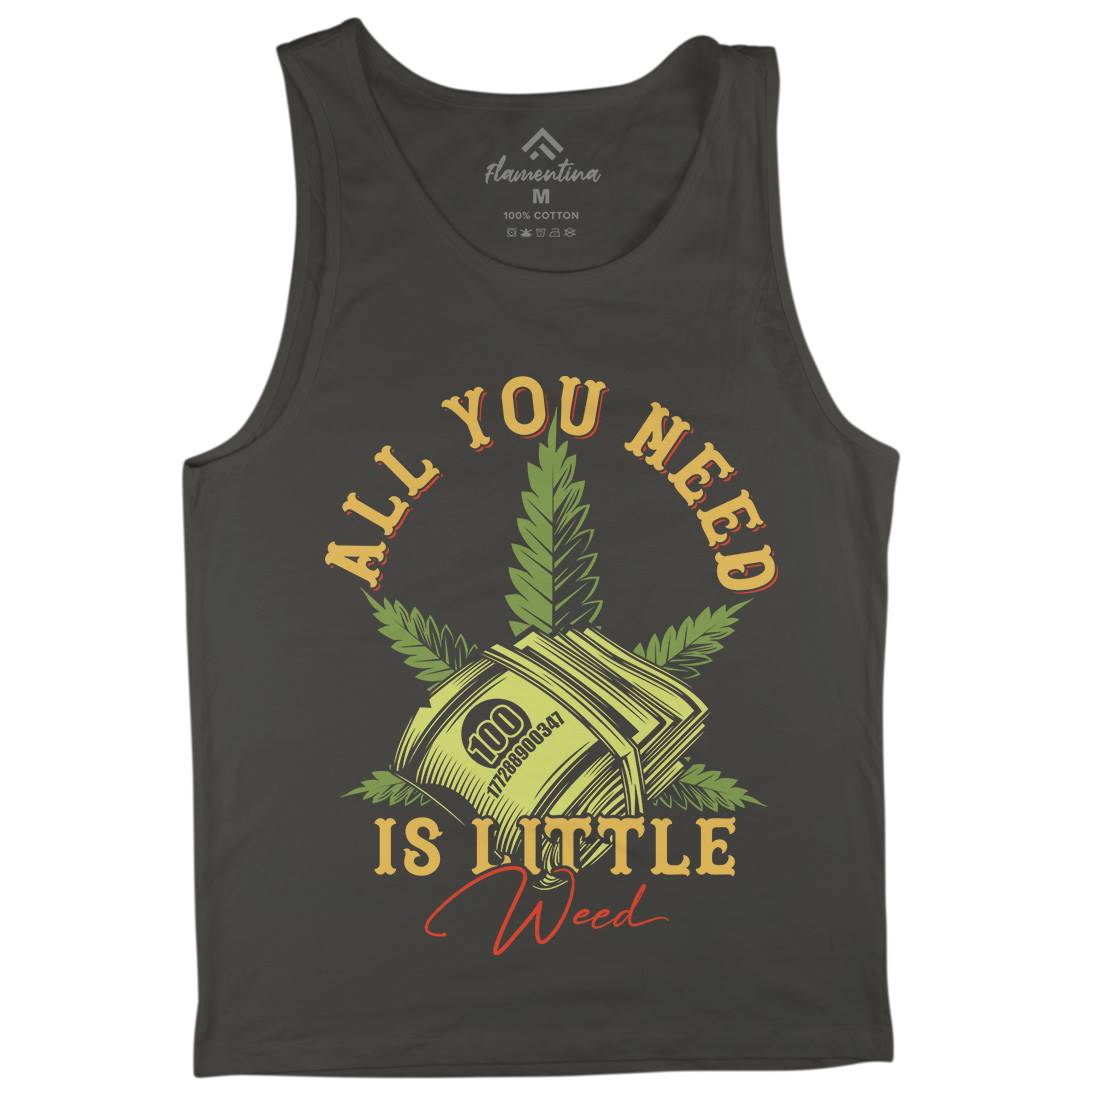 All You Need Mens Tank Top Vest Drugs B809